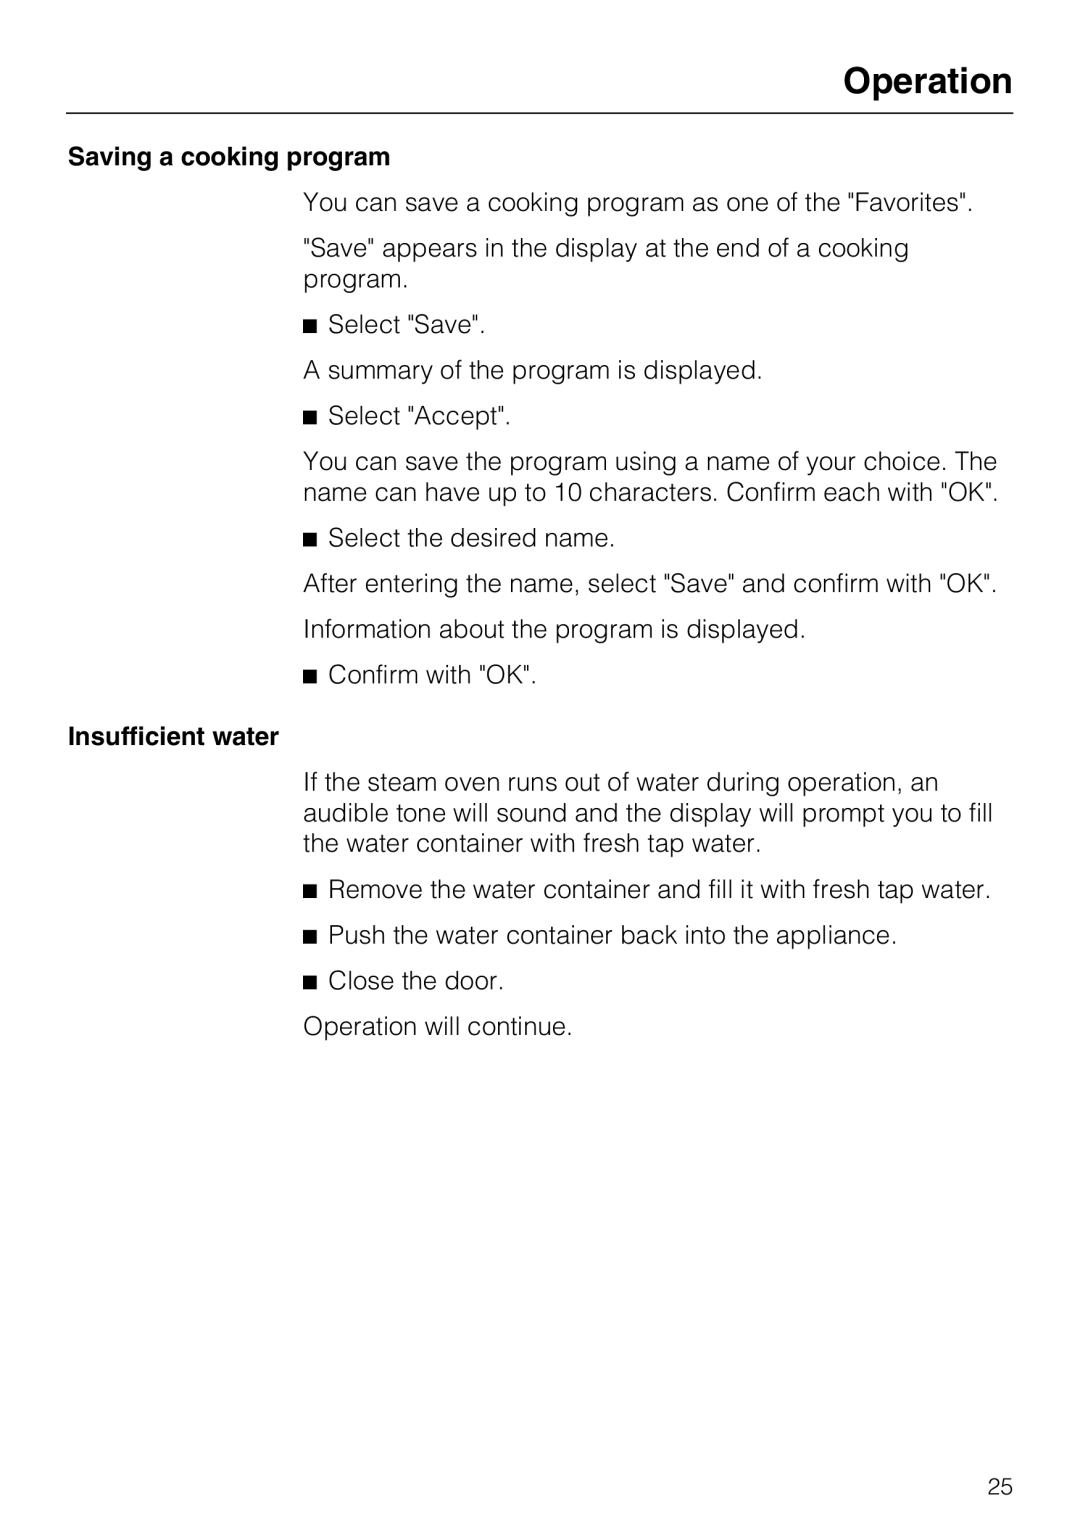 Miele 09 800 830 installation instructions Operation, Saving a cooking program, Insufficient water 